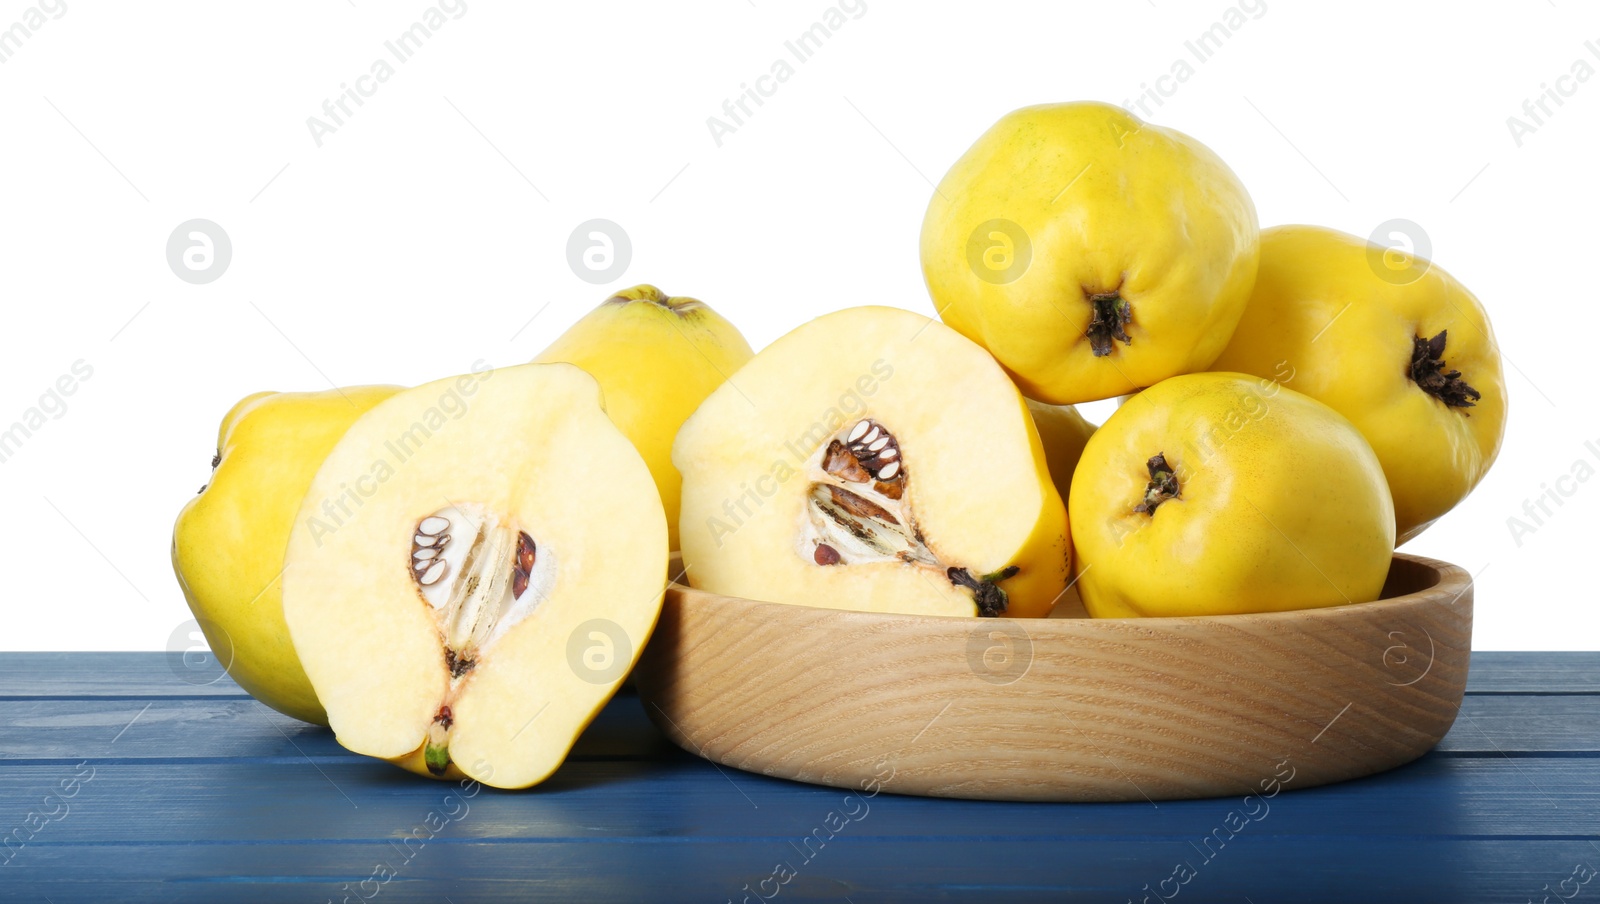 Photo of Ripe whole and cut quinces on blue wooden table against white background